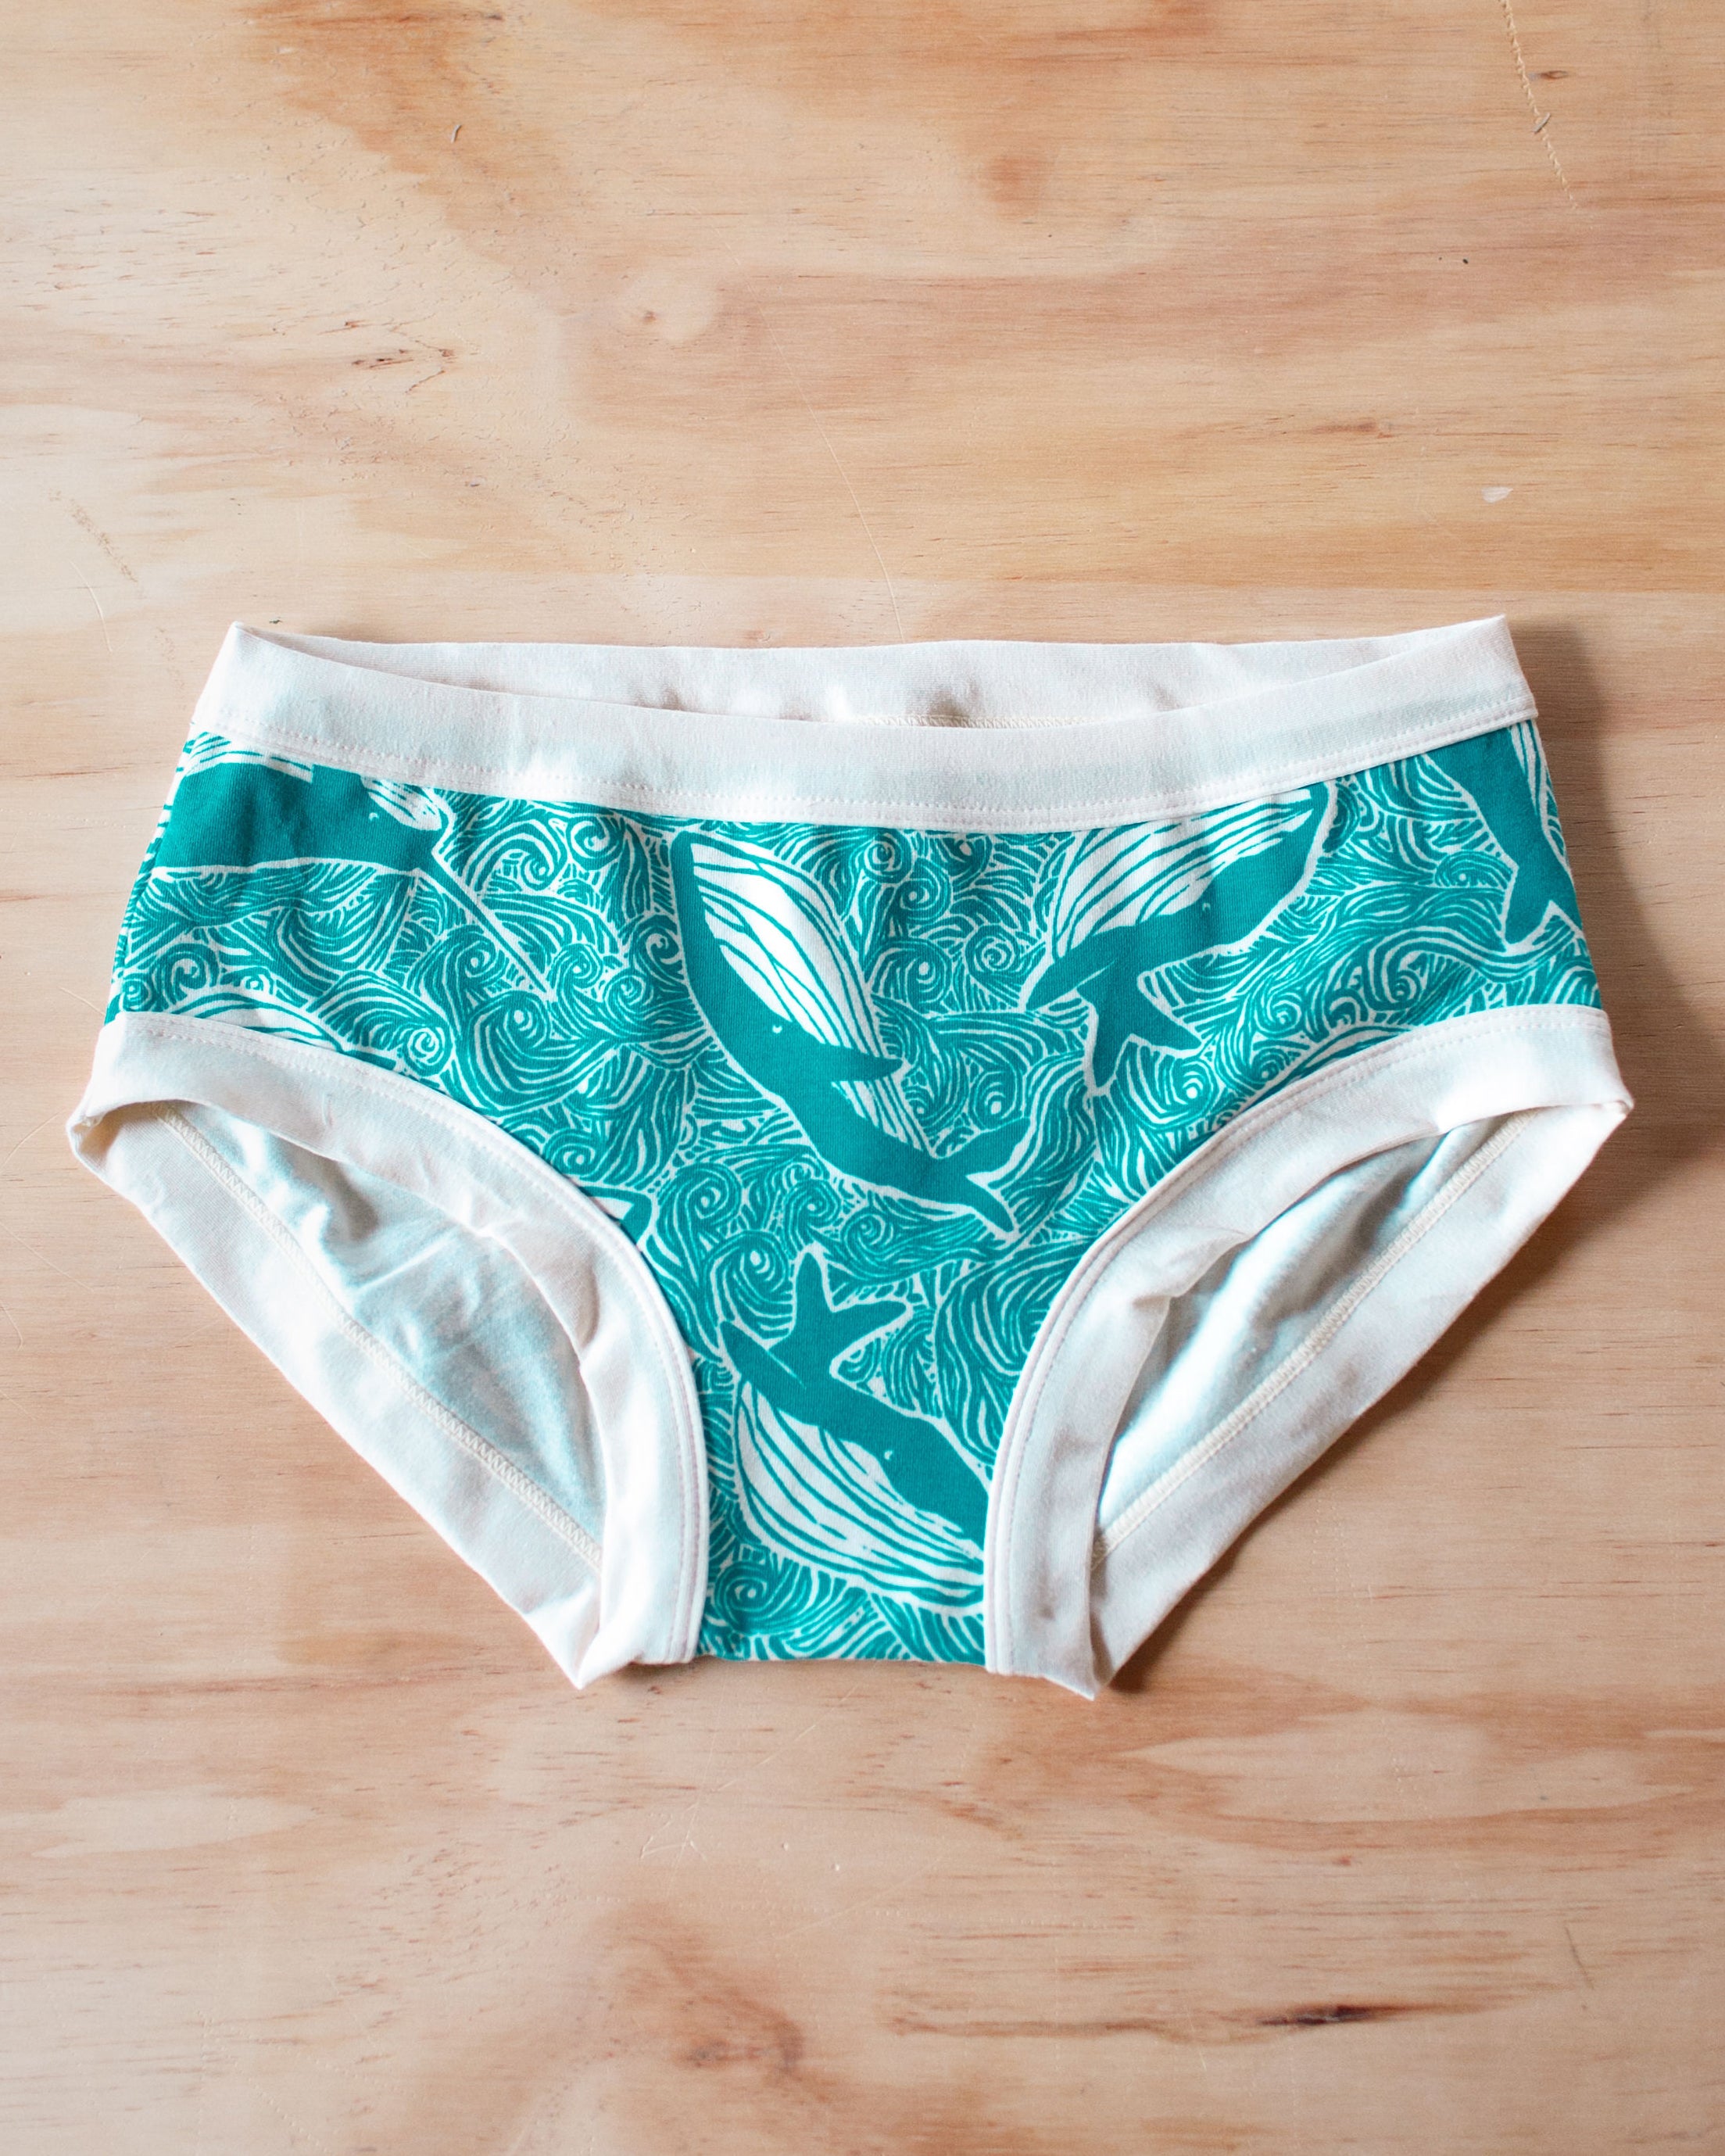 Flat lay of Thunderpanst organic cotton Hipster style underwear in our Marine Whales print: turquoise all-over whale and ocean print.